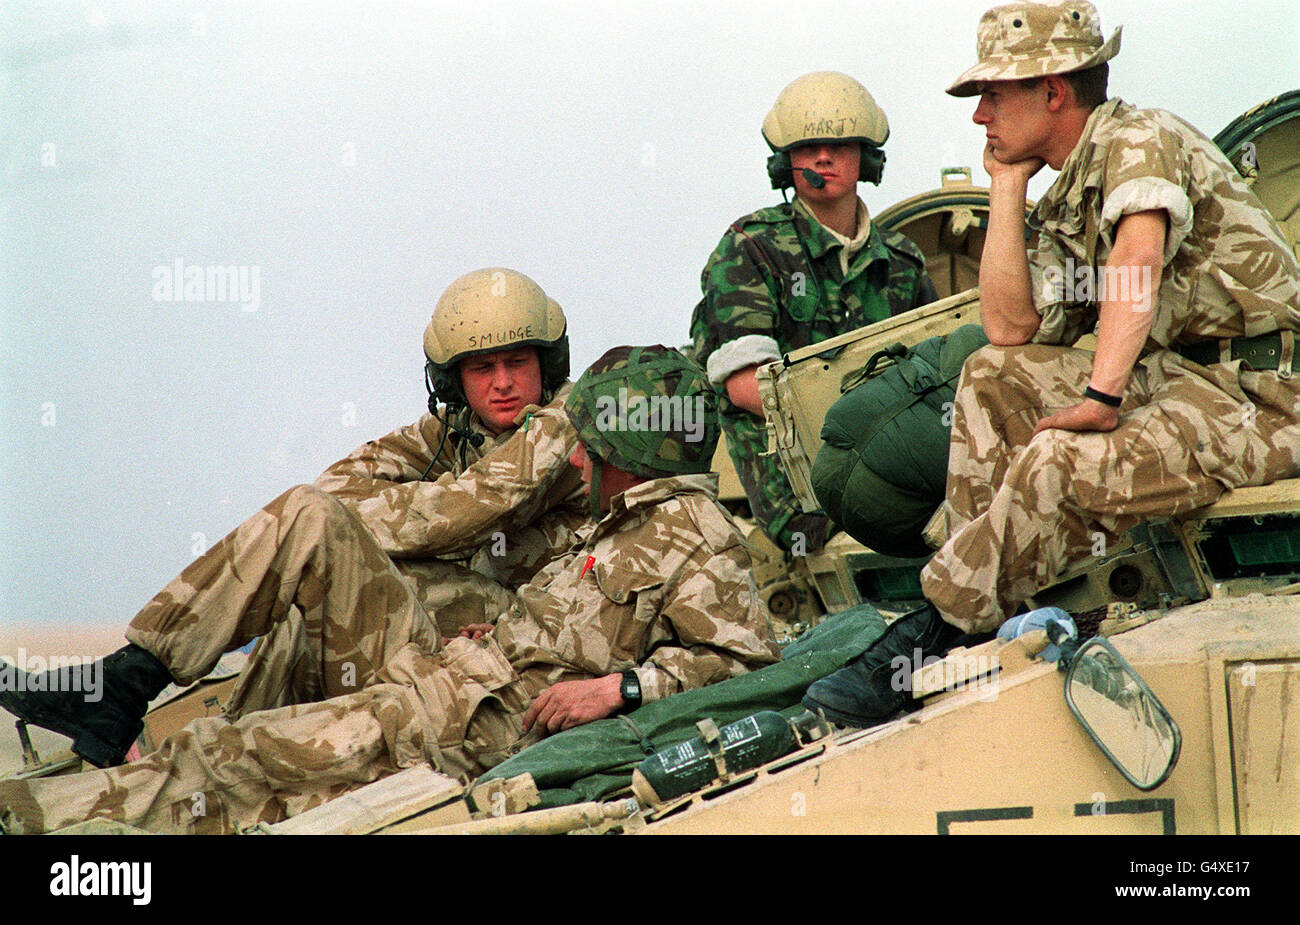 THE GULF WAR: SOLDIERS OF THE ROYAL ENGINEERS ARMOURED DIVISION, INCLUDING 'MARTY' AND 'SMUDGE', TAKE A BREAK ON THEIR COMBAT ENGINE TRACTORS USED FOR SEARCHING OUT LAND MINES IN THE GULF Stock Photo